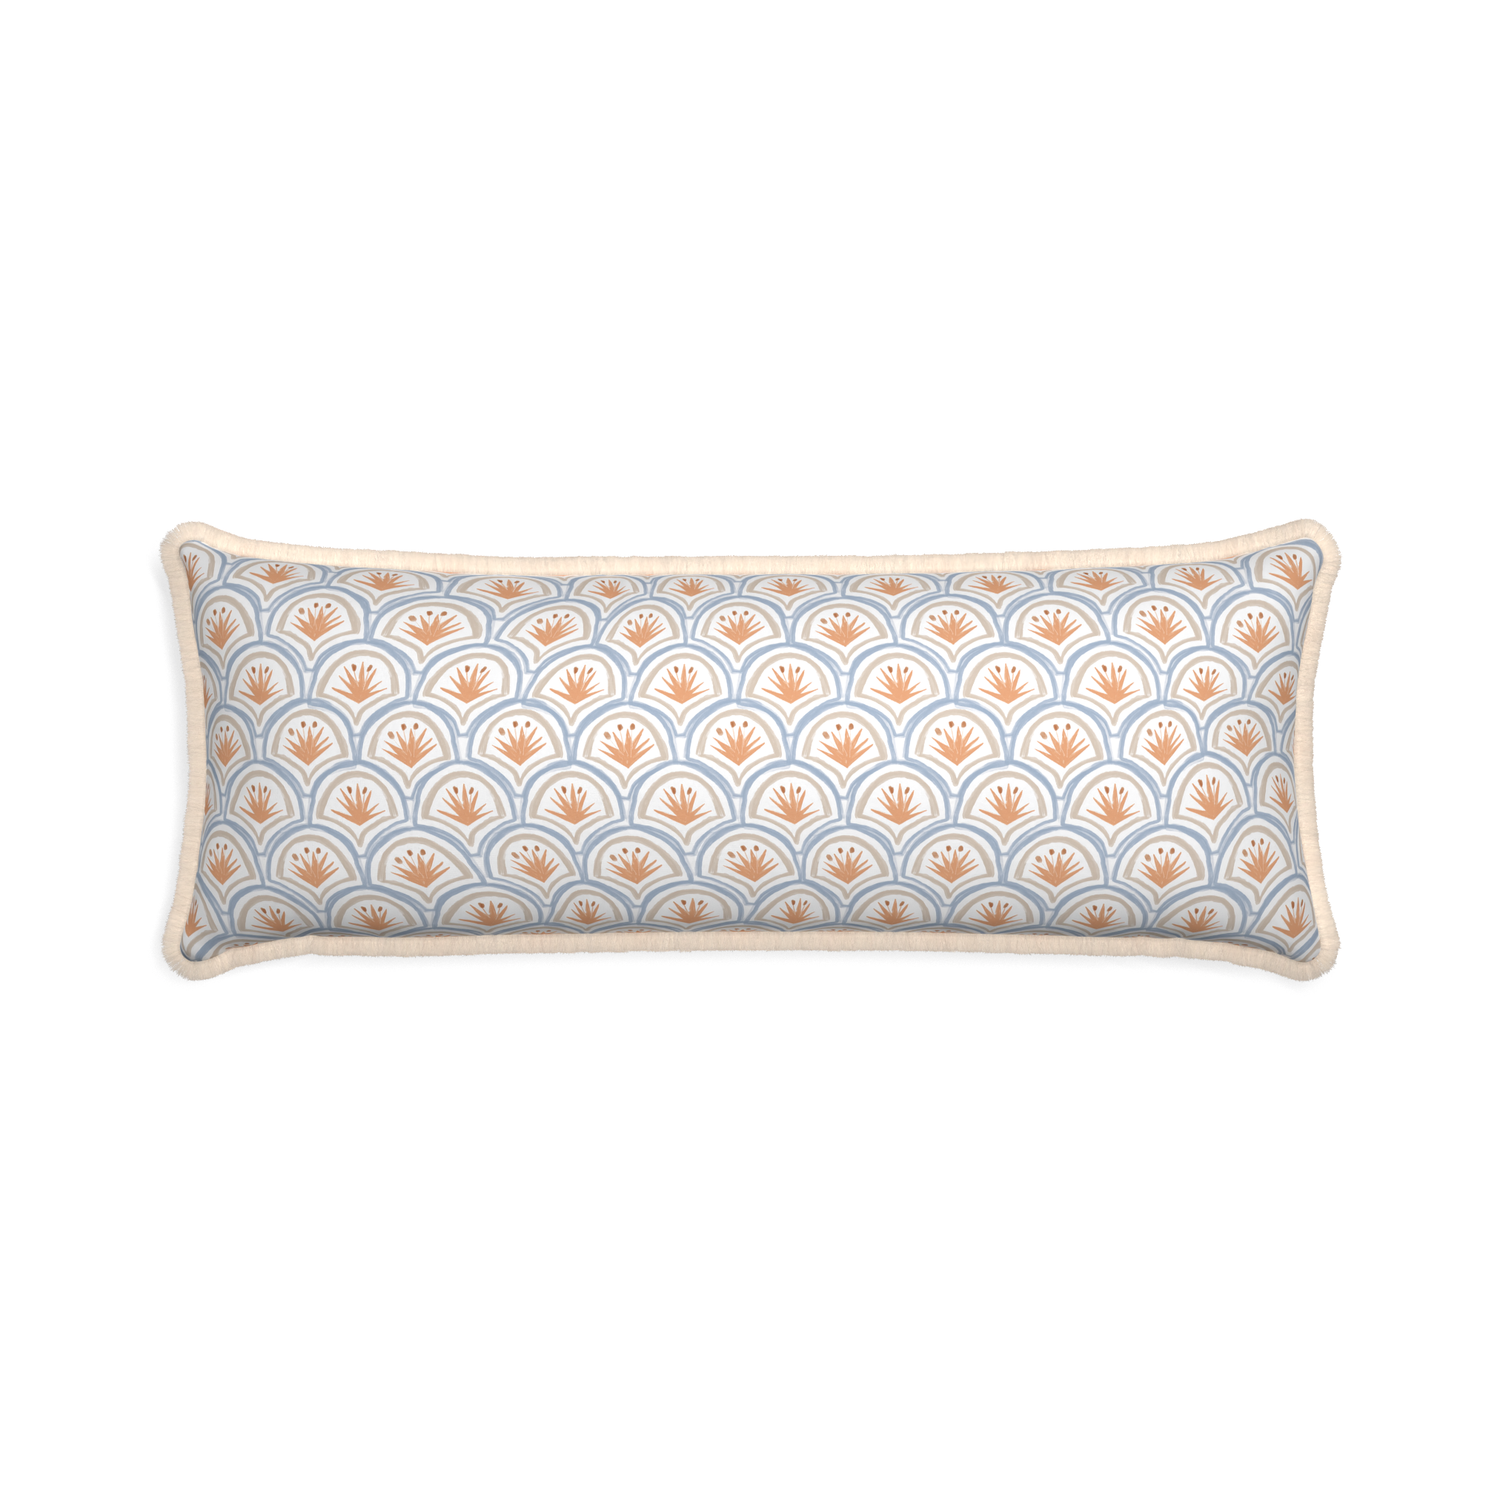 Xl-lumbar thatcher apricot custom pillow with cream fringe on white background